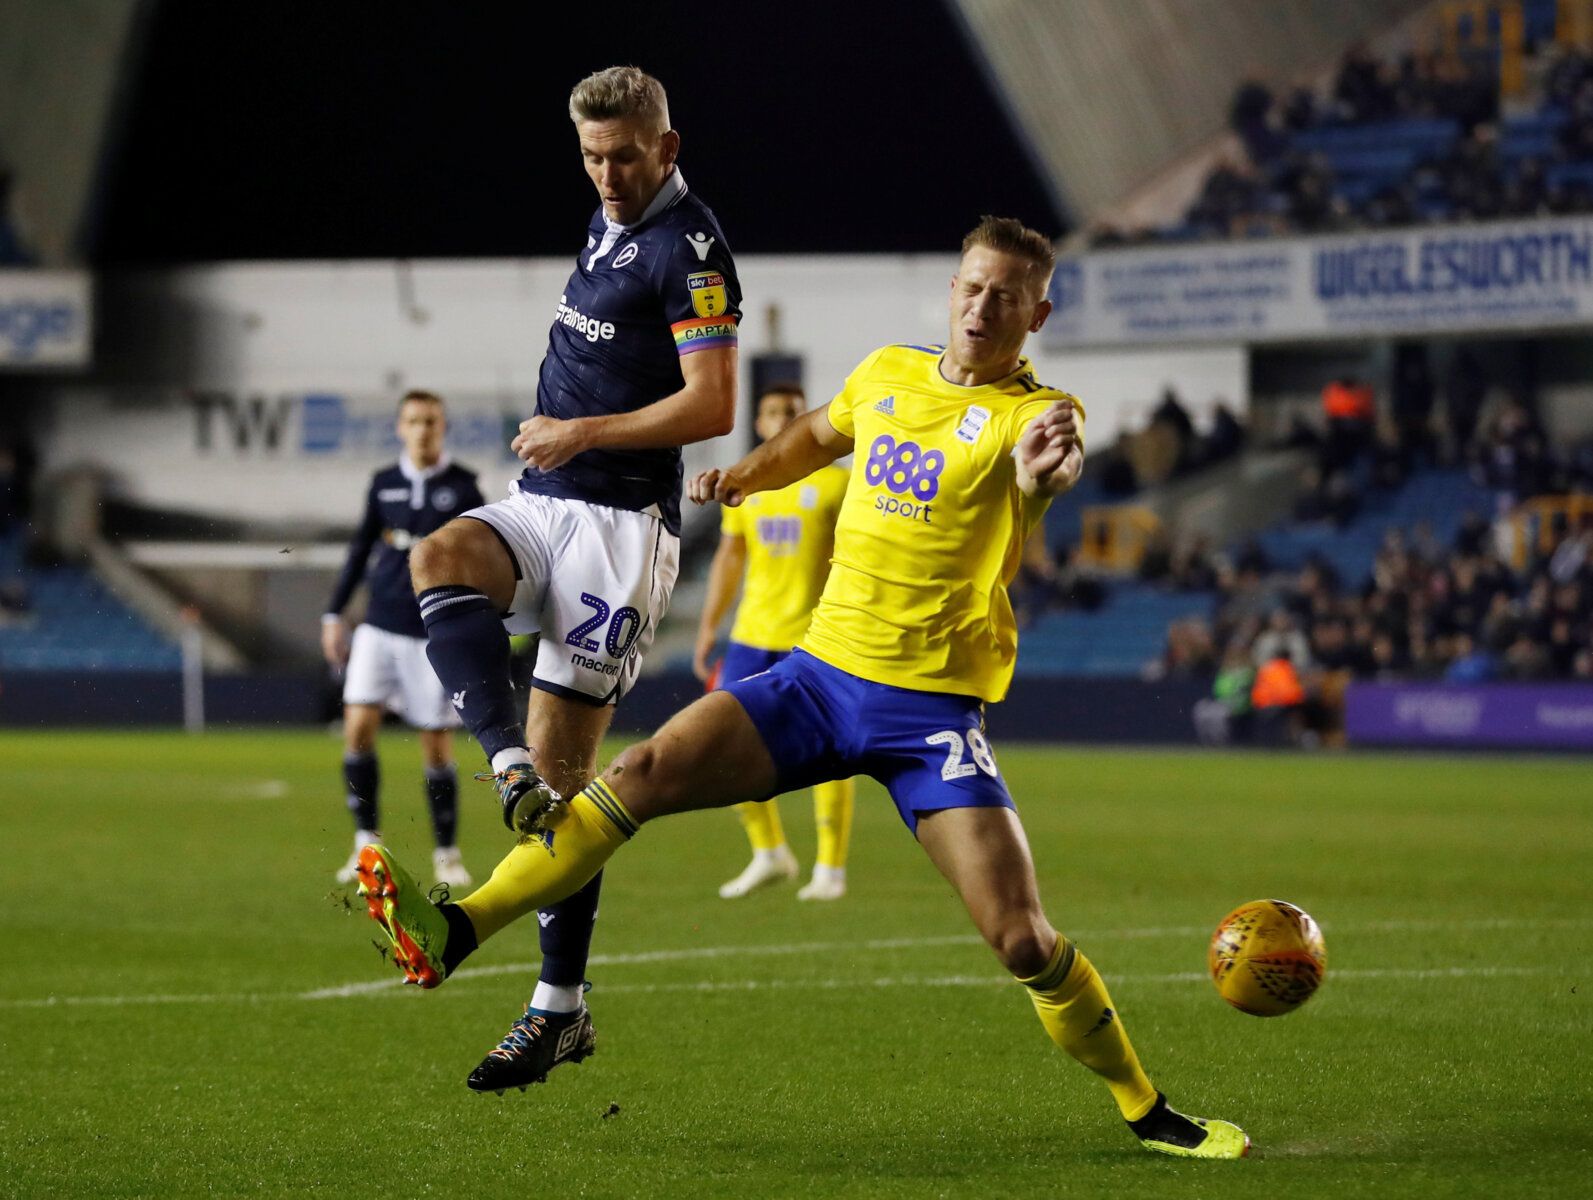 Soccer Football - Championship - Millwall v Birmingham City - The Den, London, Britain - November 28, 2018   Steve Morison of Millwall in action with Michael Morrison of Birmingham City   Action Images/Matthew Childs    EDITORIAL USE ONLY. No use with unauthorized audio, video, data, fixture lists, club/league logos or 